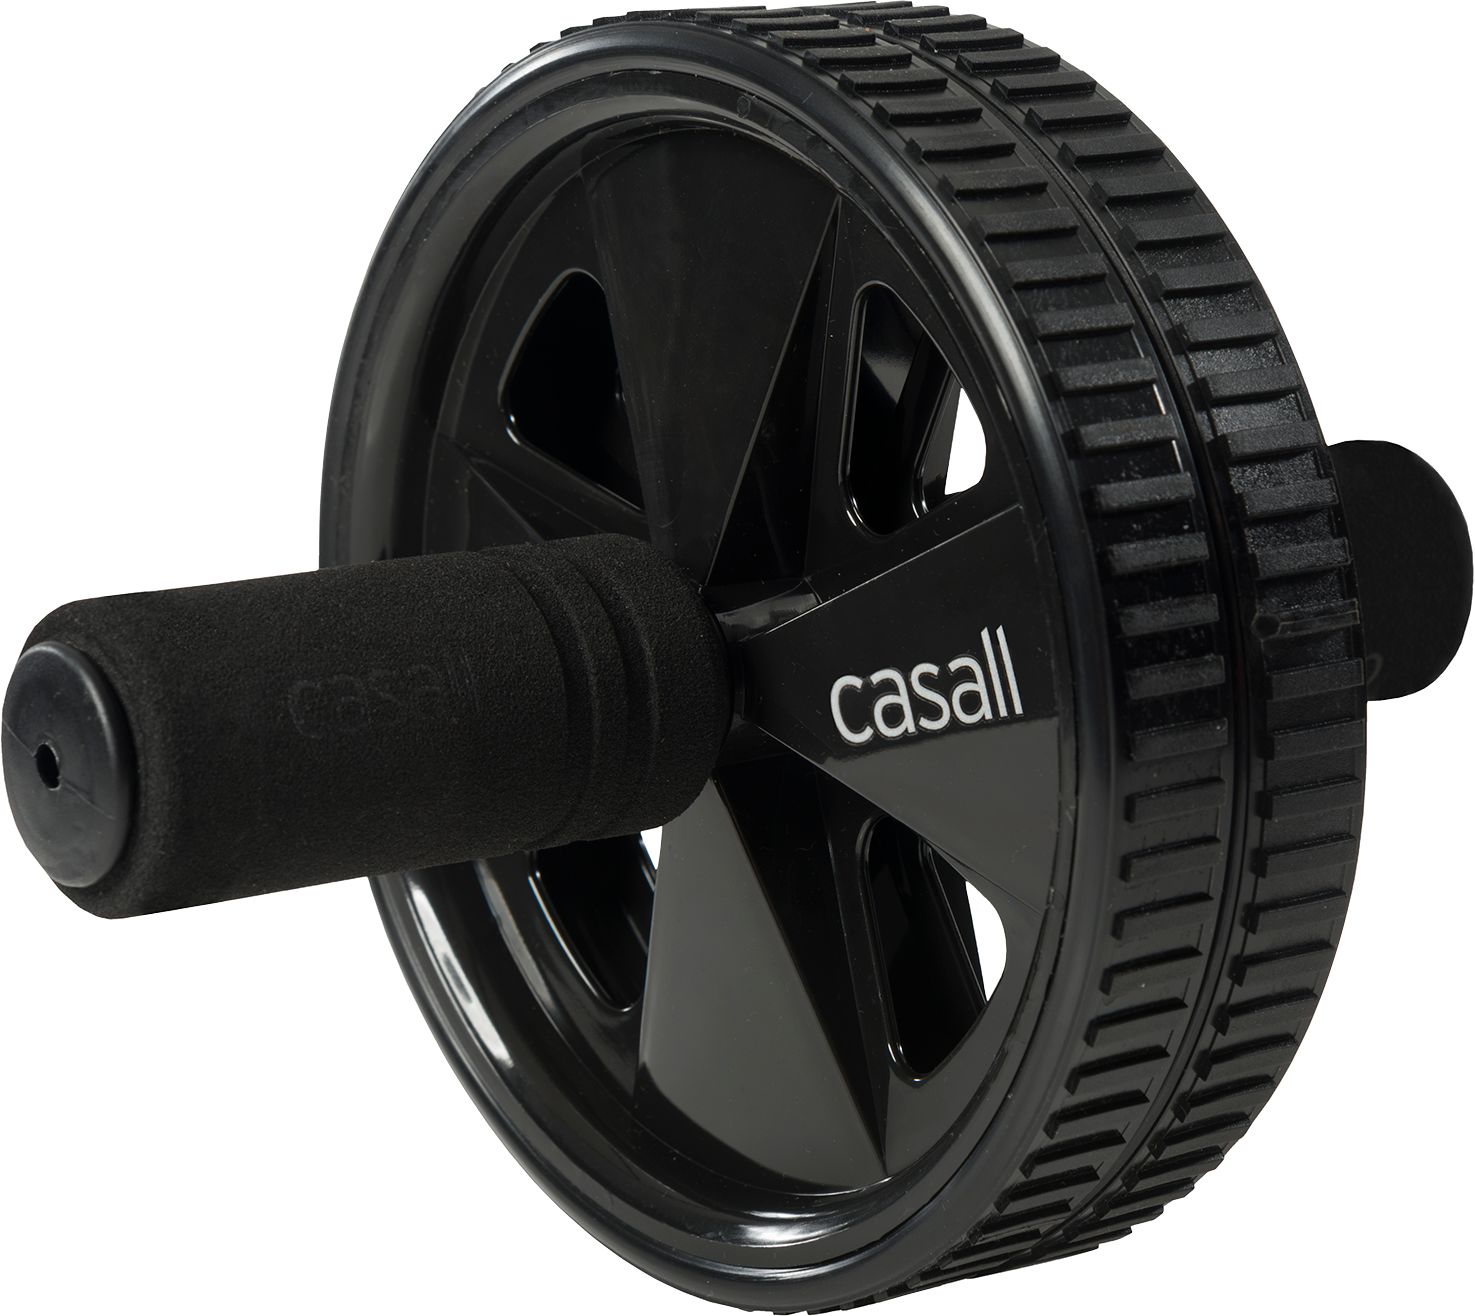 CASALL, AB ROLLER RECYCLED